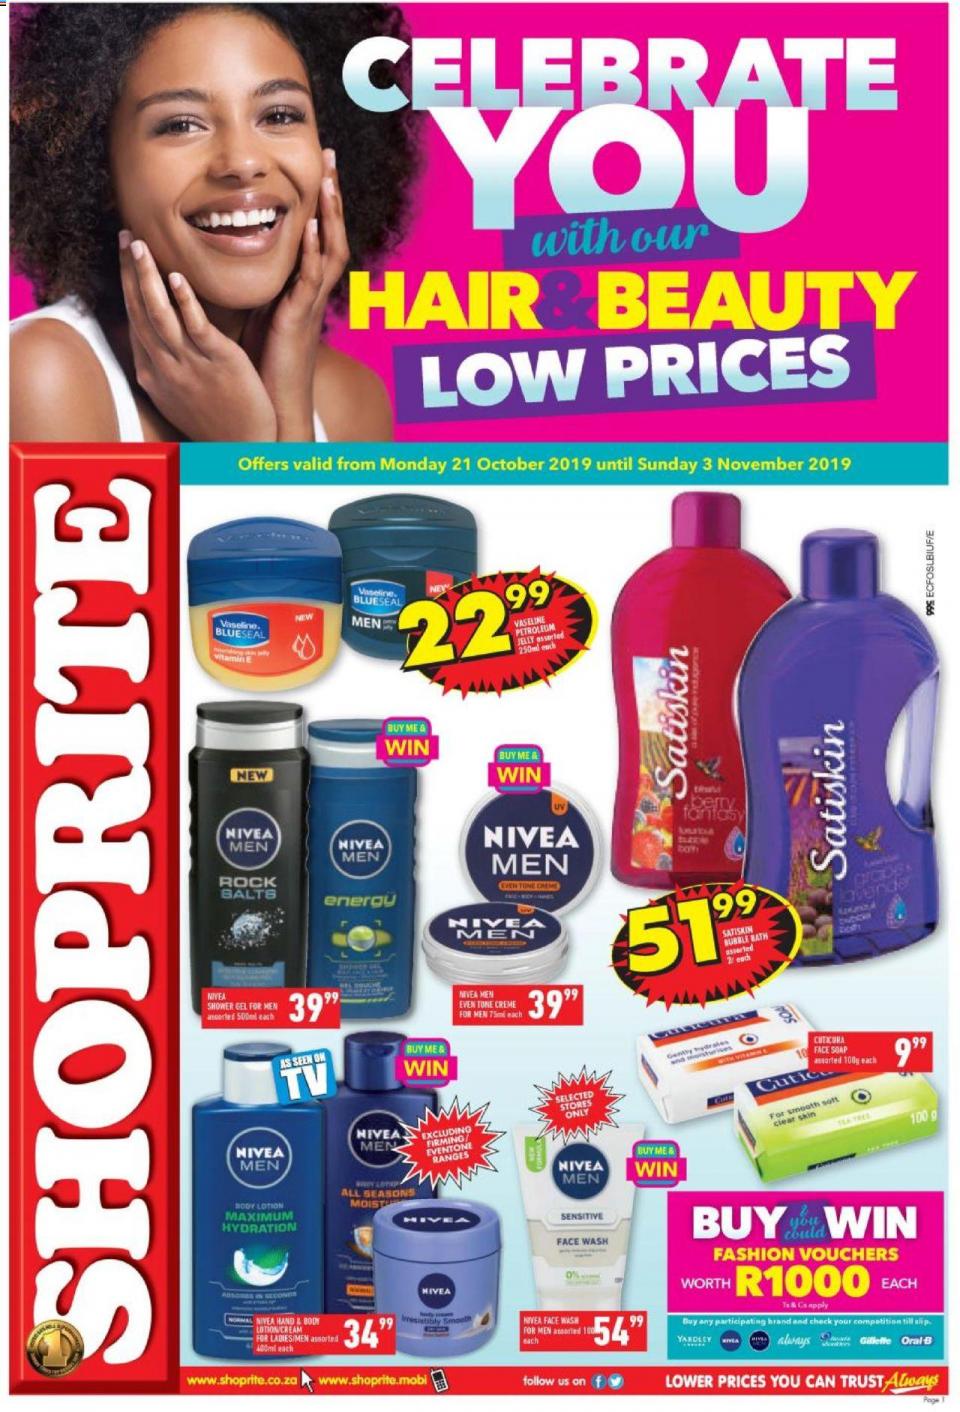 Shoprite Specials Hair & Beauty Promotion 21 October 2019